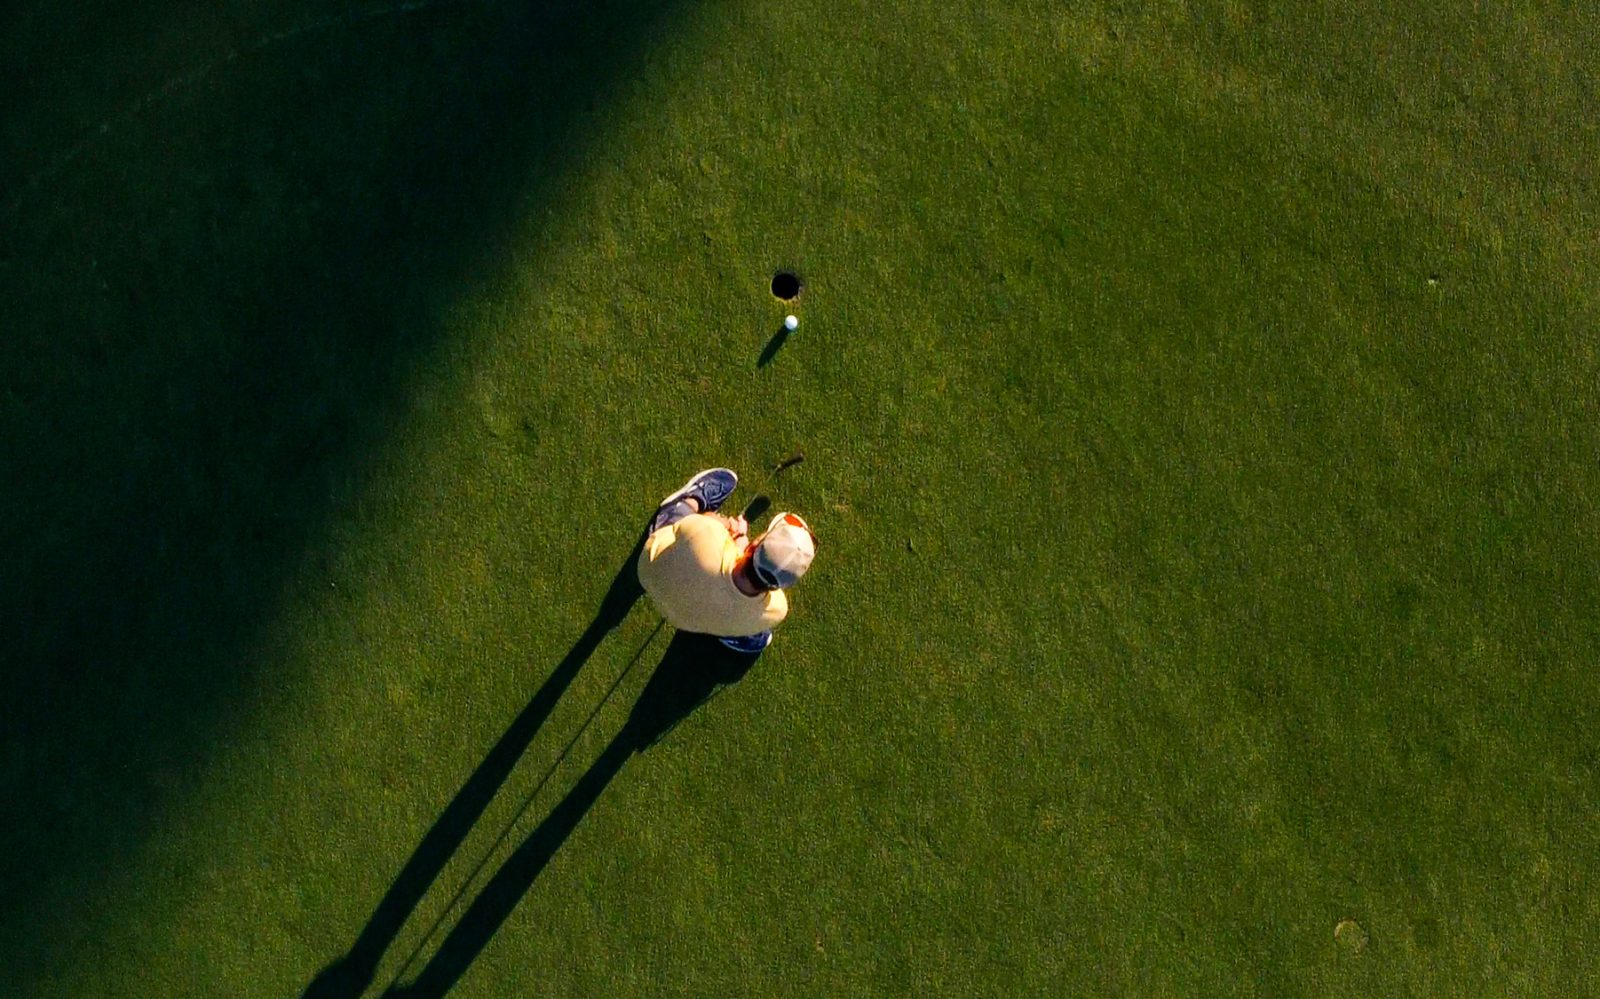 Aerial view of man putting golf ball on the golf green into the hole.